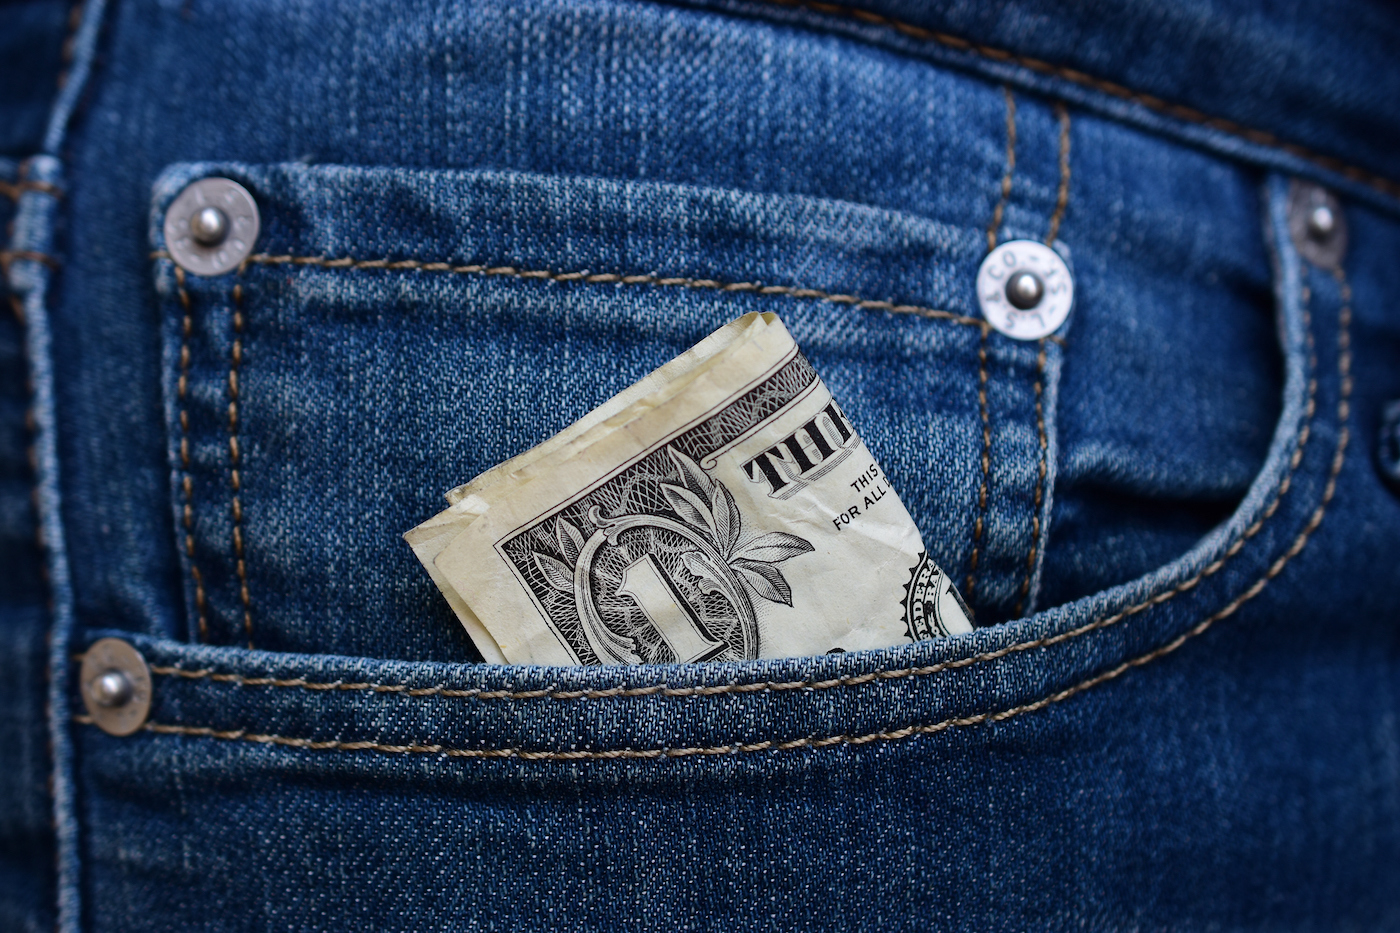 A folded dollar bill hidden in the front pocket of his jeans.